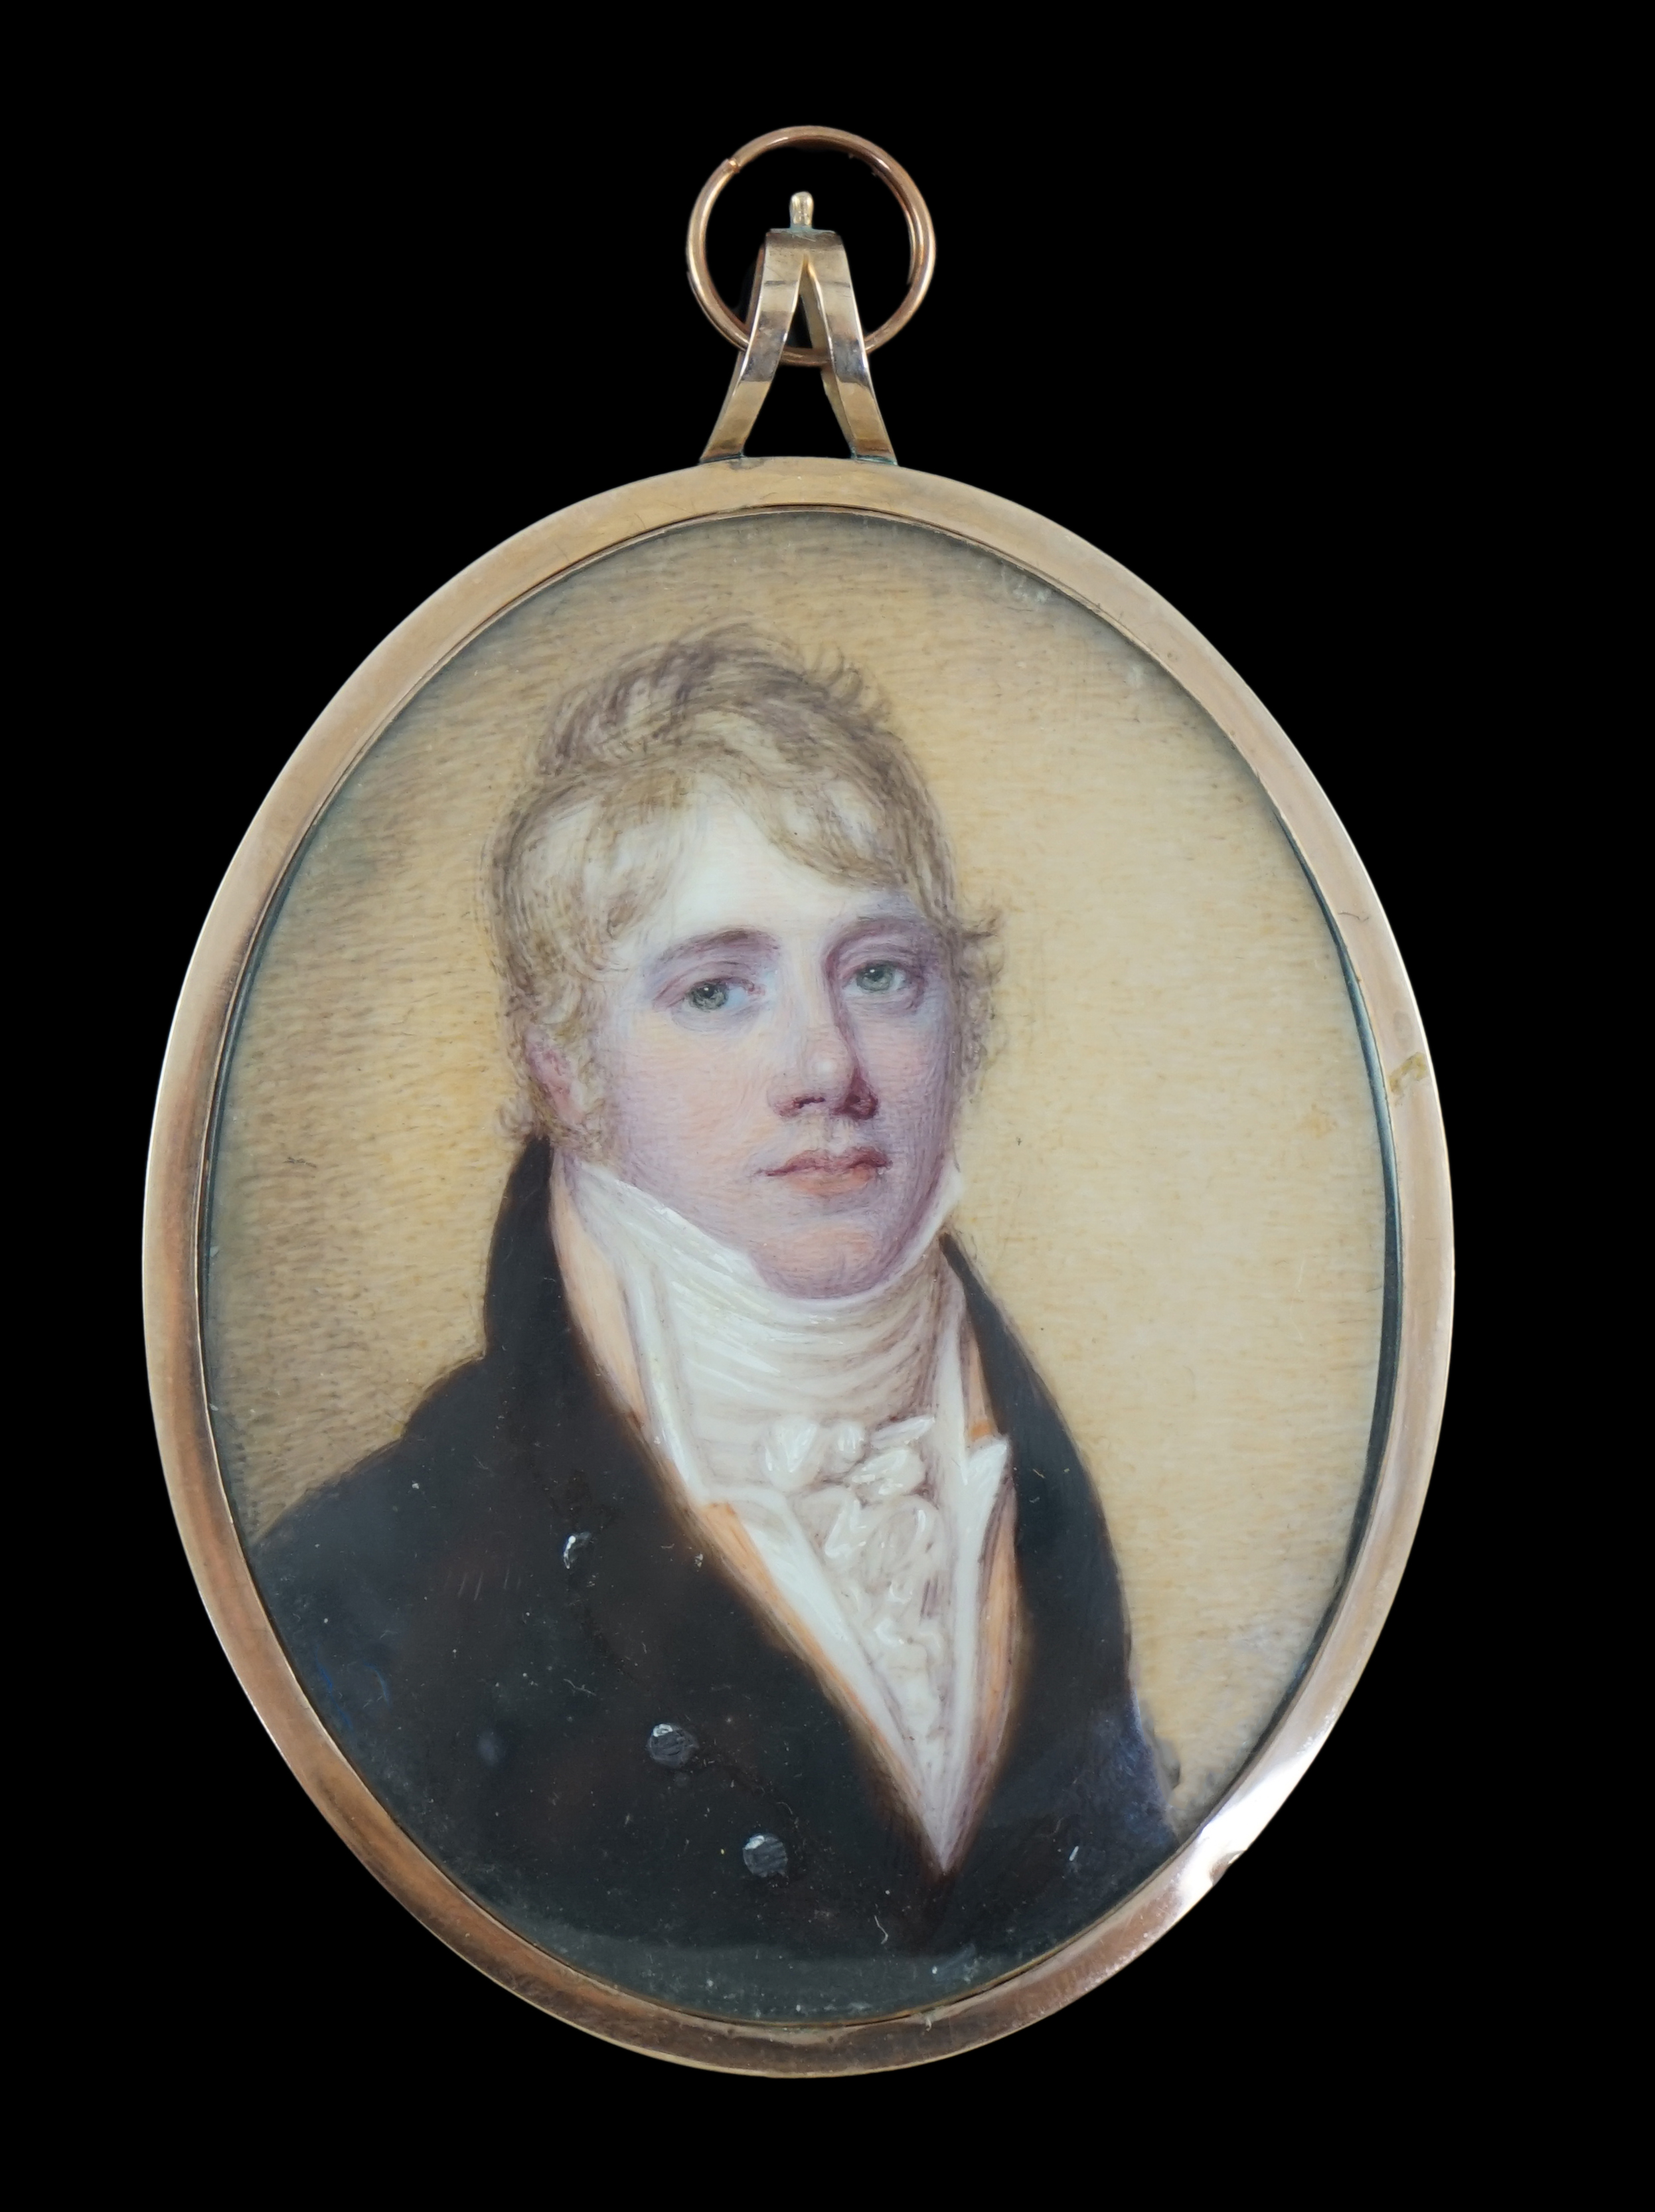 Attributed to John Comerford (c. 1770-1832)? , Portrait miniature of a young man, watercolour on ivory, 7.3 x 5.5cm. CITES Submission reference 433QZK6J